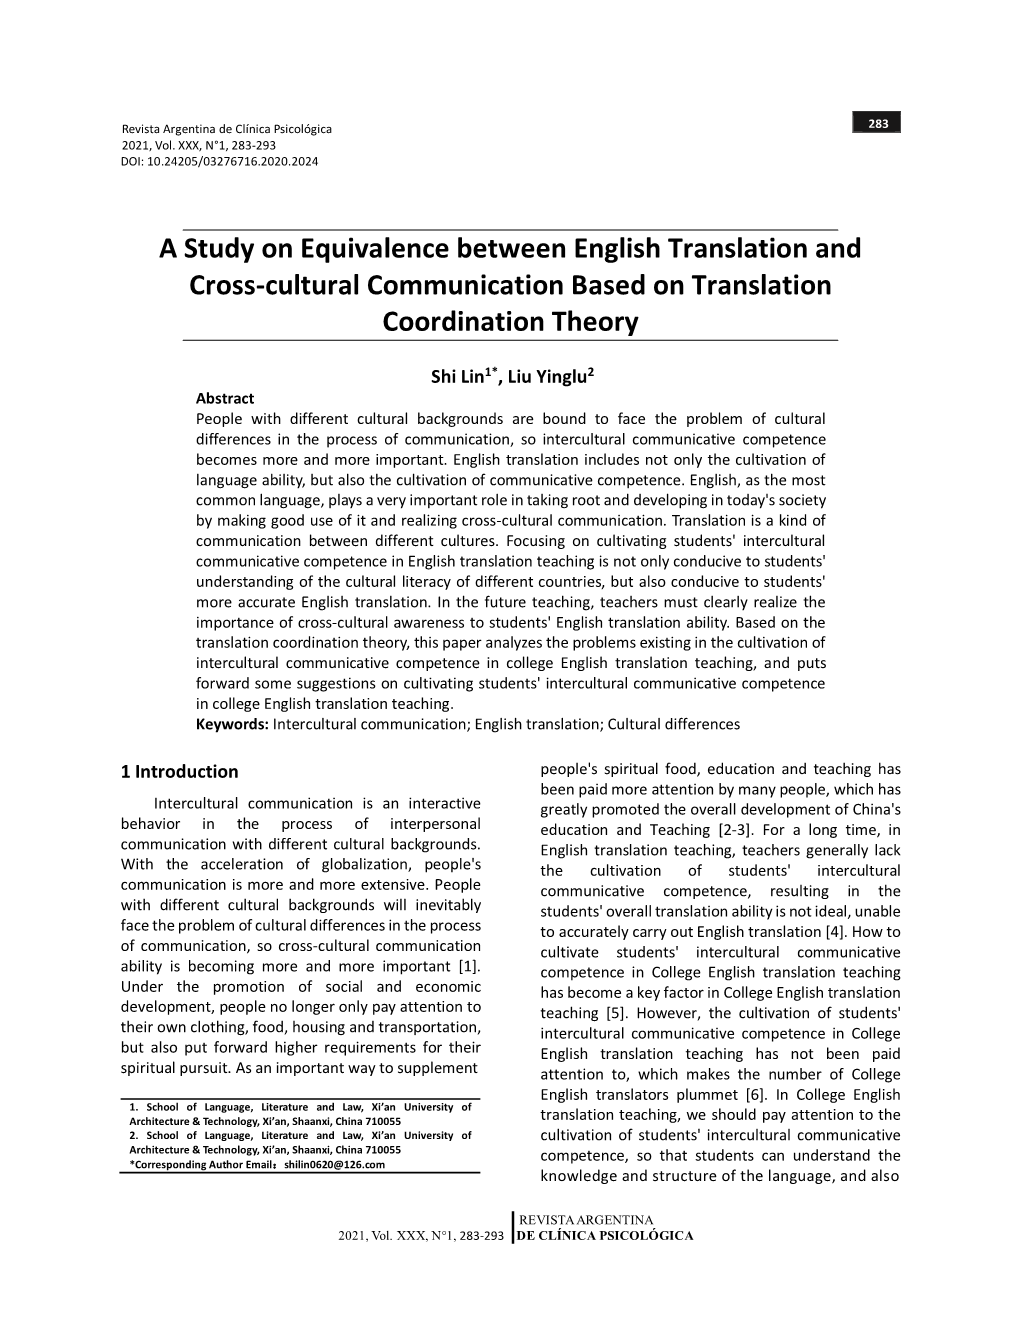 A Study on Equivalence Between English Translation and Cross-Cultural Communication Based on Translation Coordination Theory